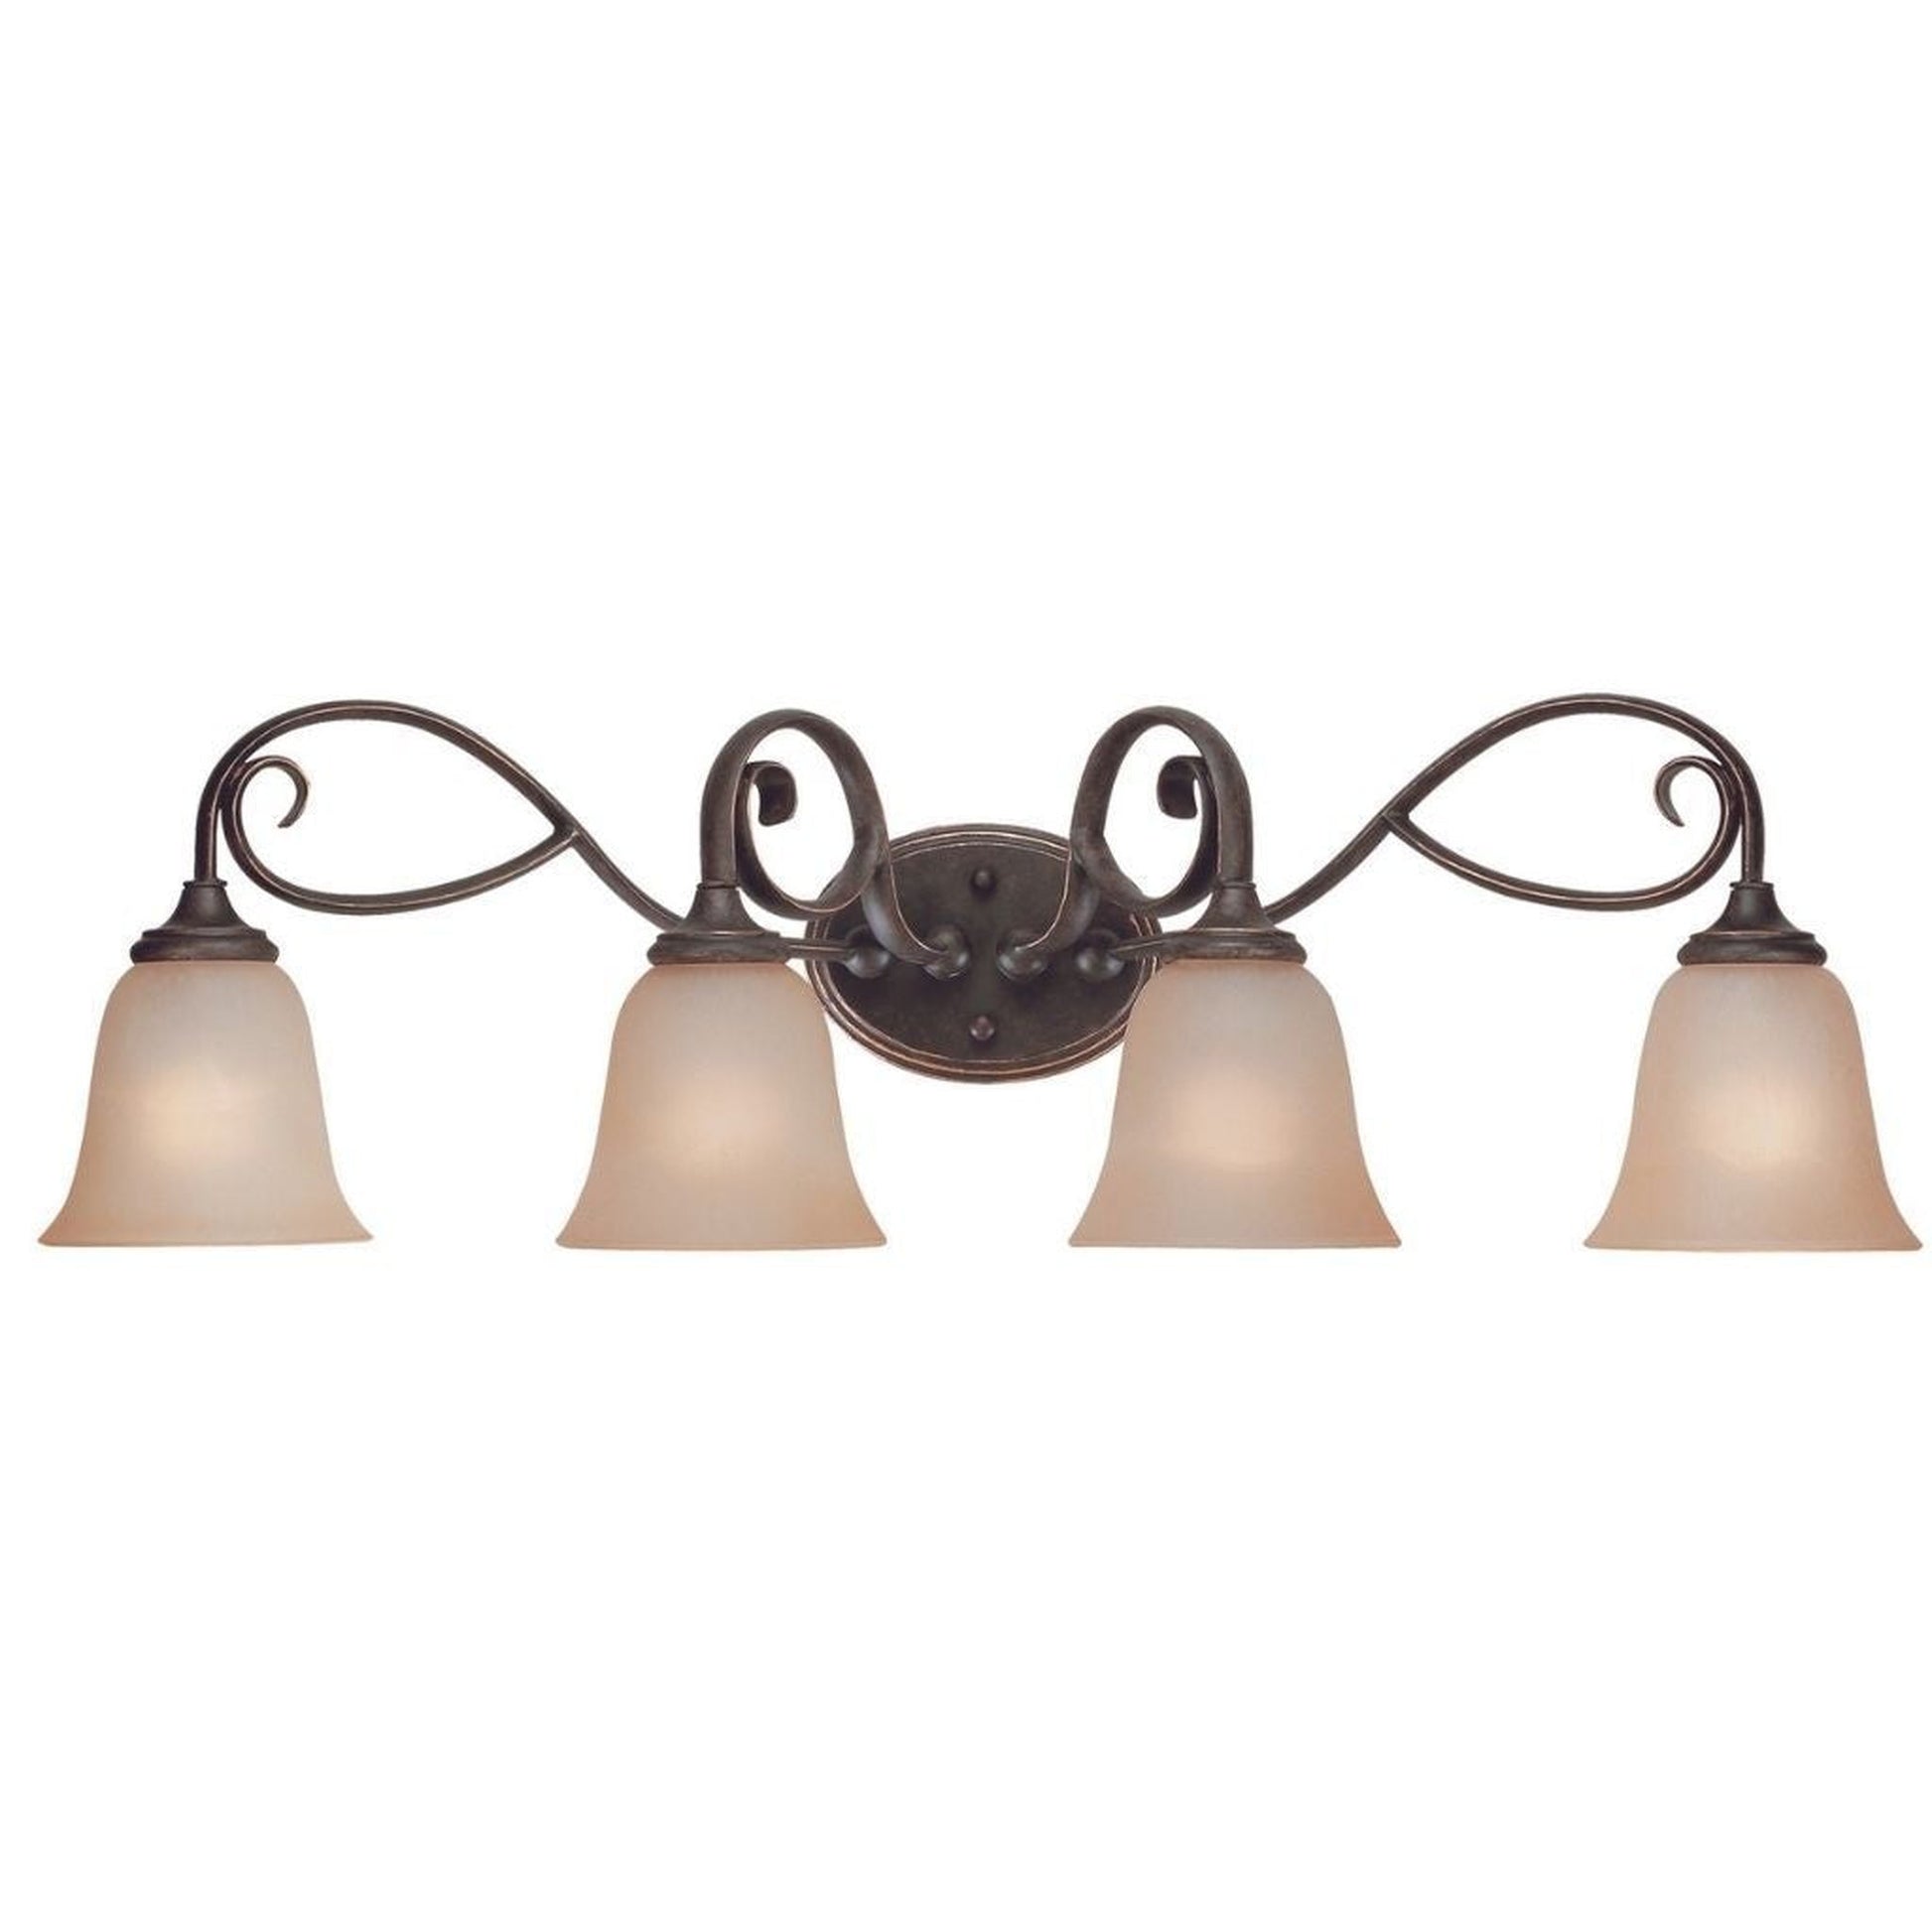 Craftmade Barrett Place 33" 4-Light Mocha Bronze Vanity Light With Light Umber Etched Glass Shades